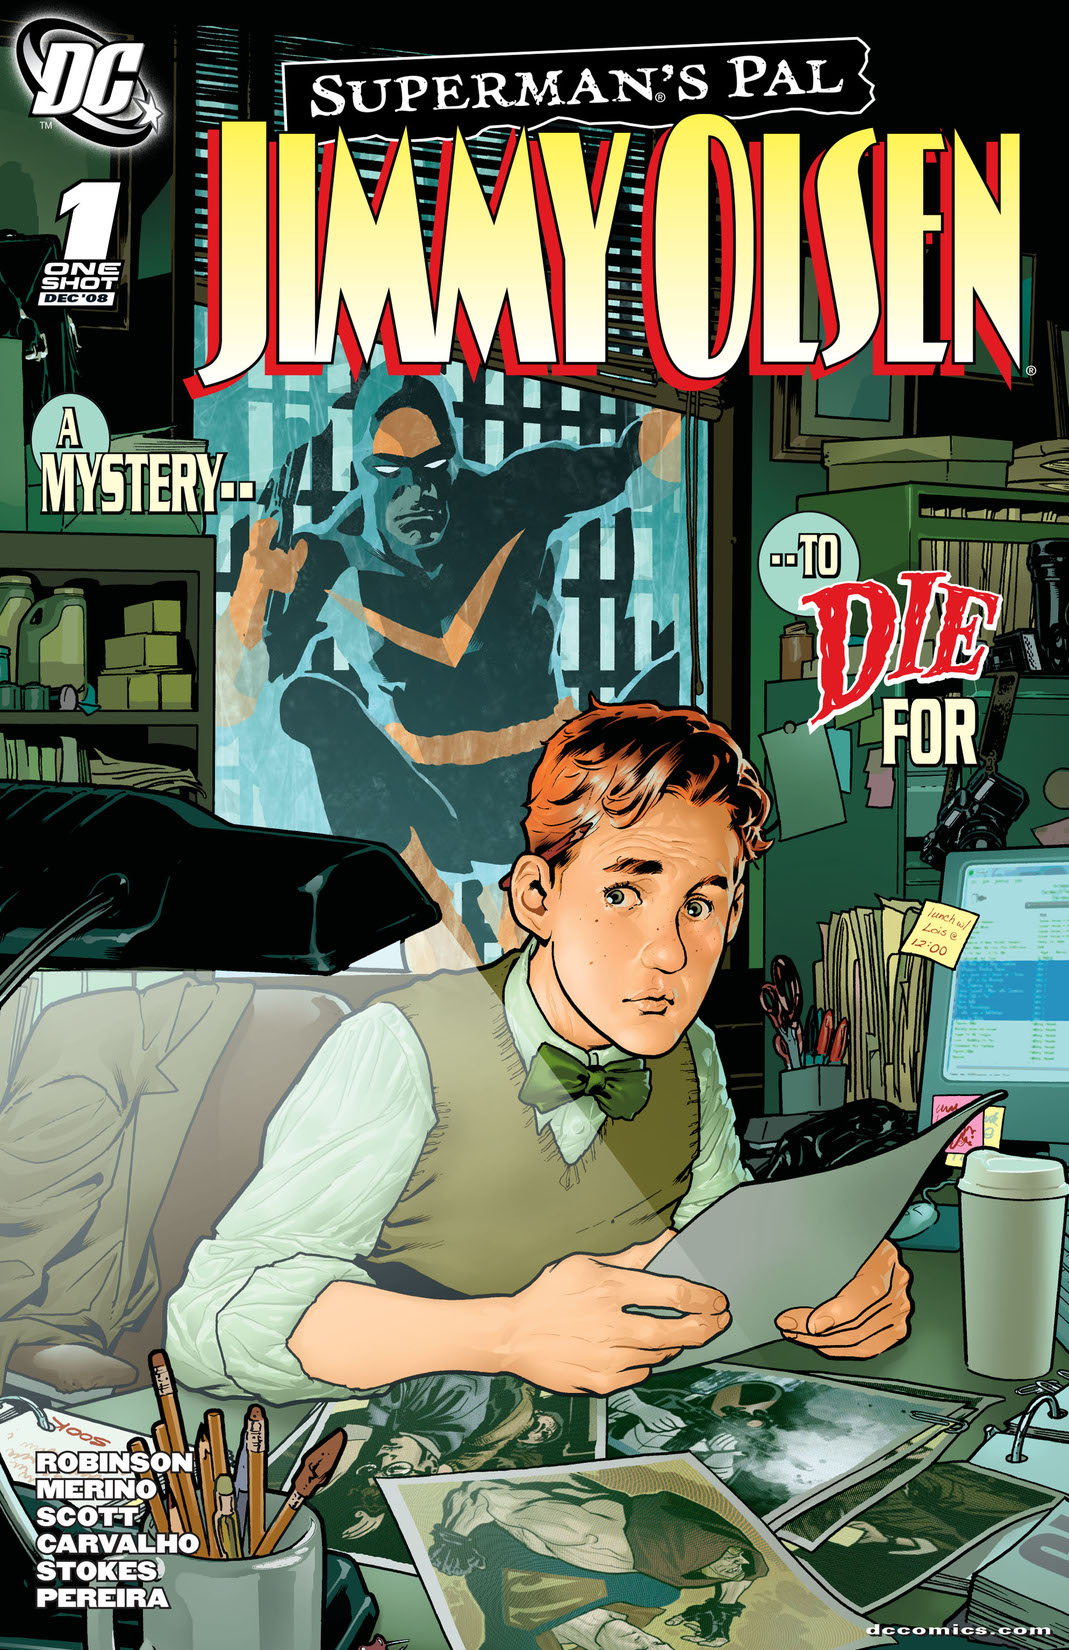 Superman's Pal, Jimmy Olsen Special #1 preview images